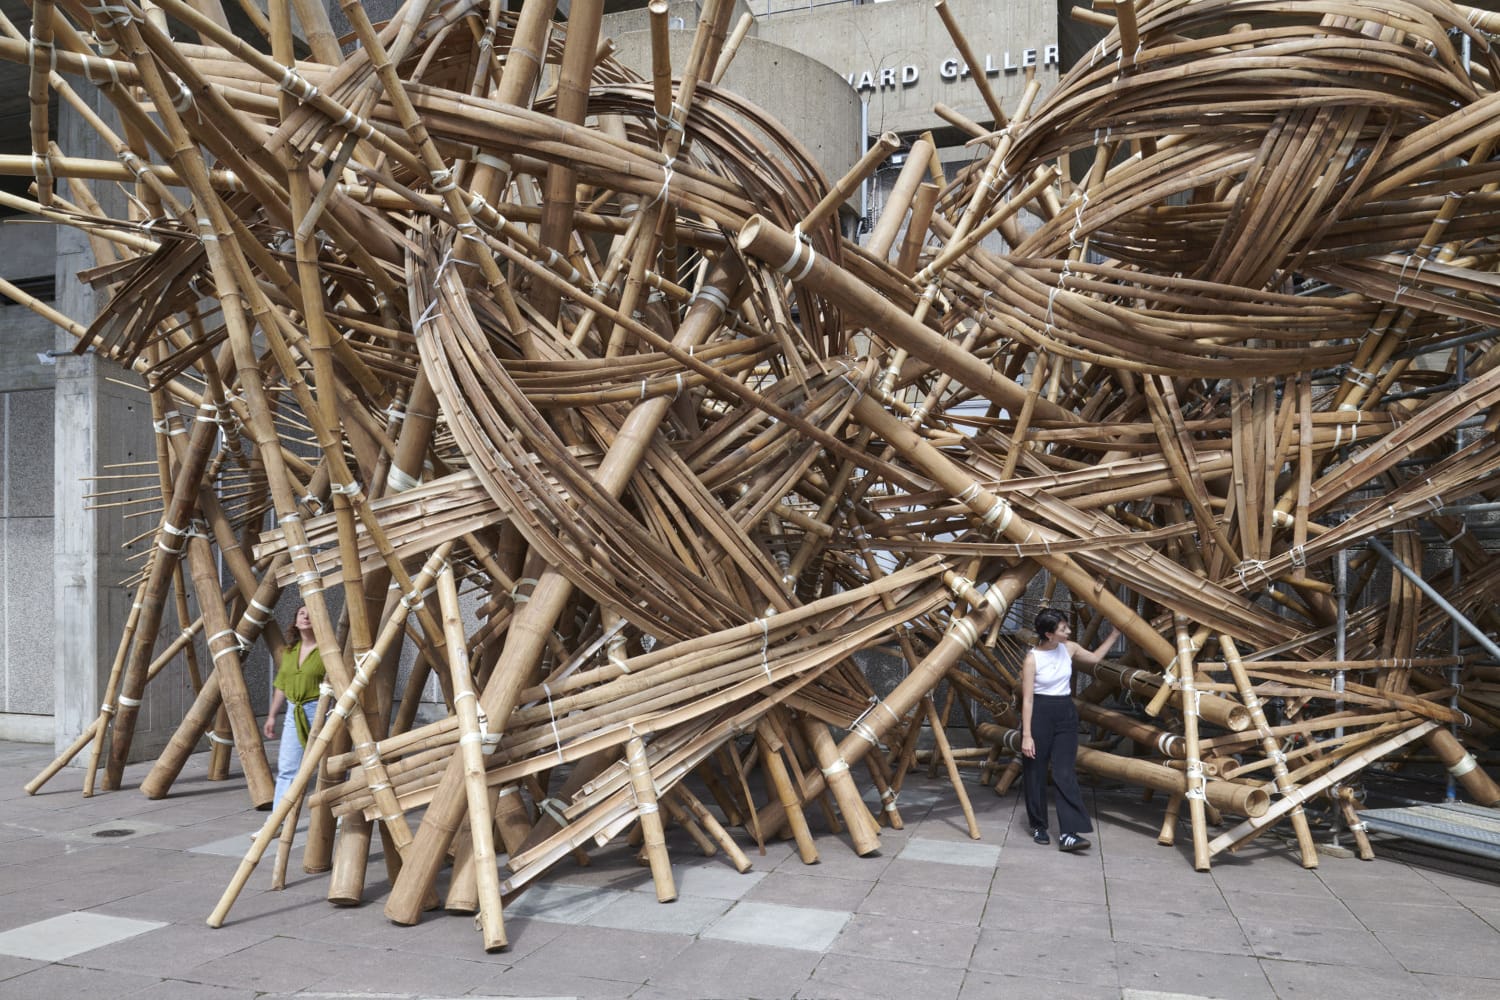 a person stands in a large bamboo structure on the sidewalk